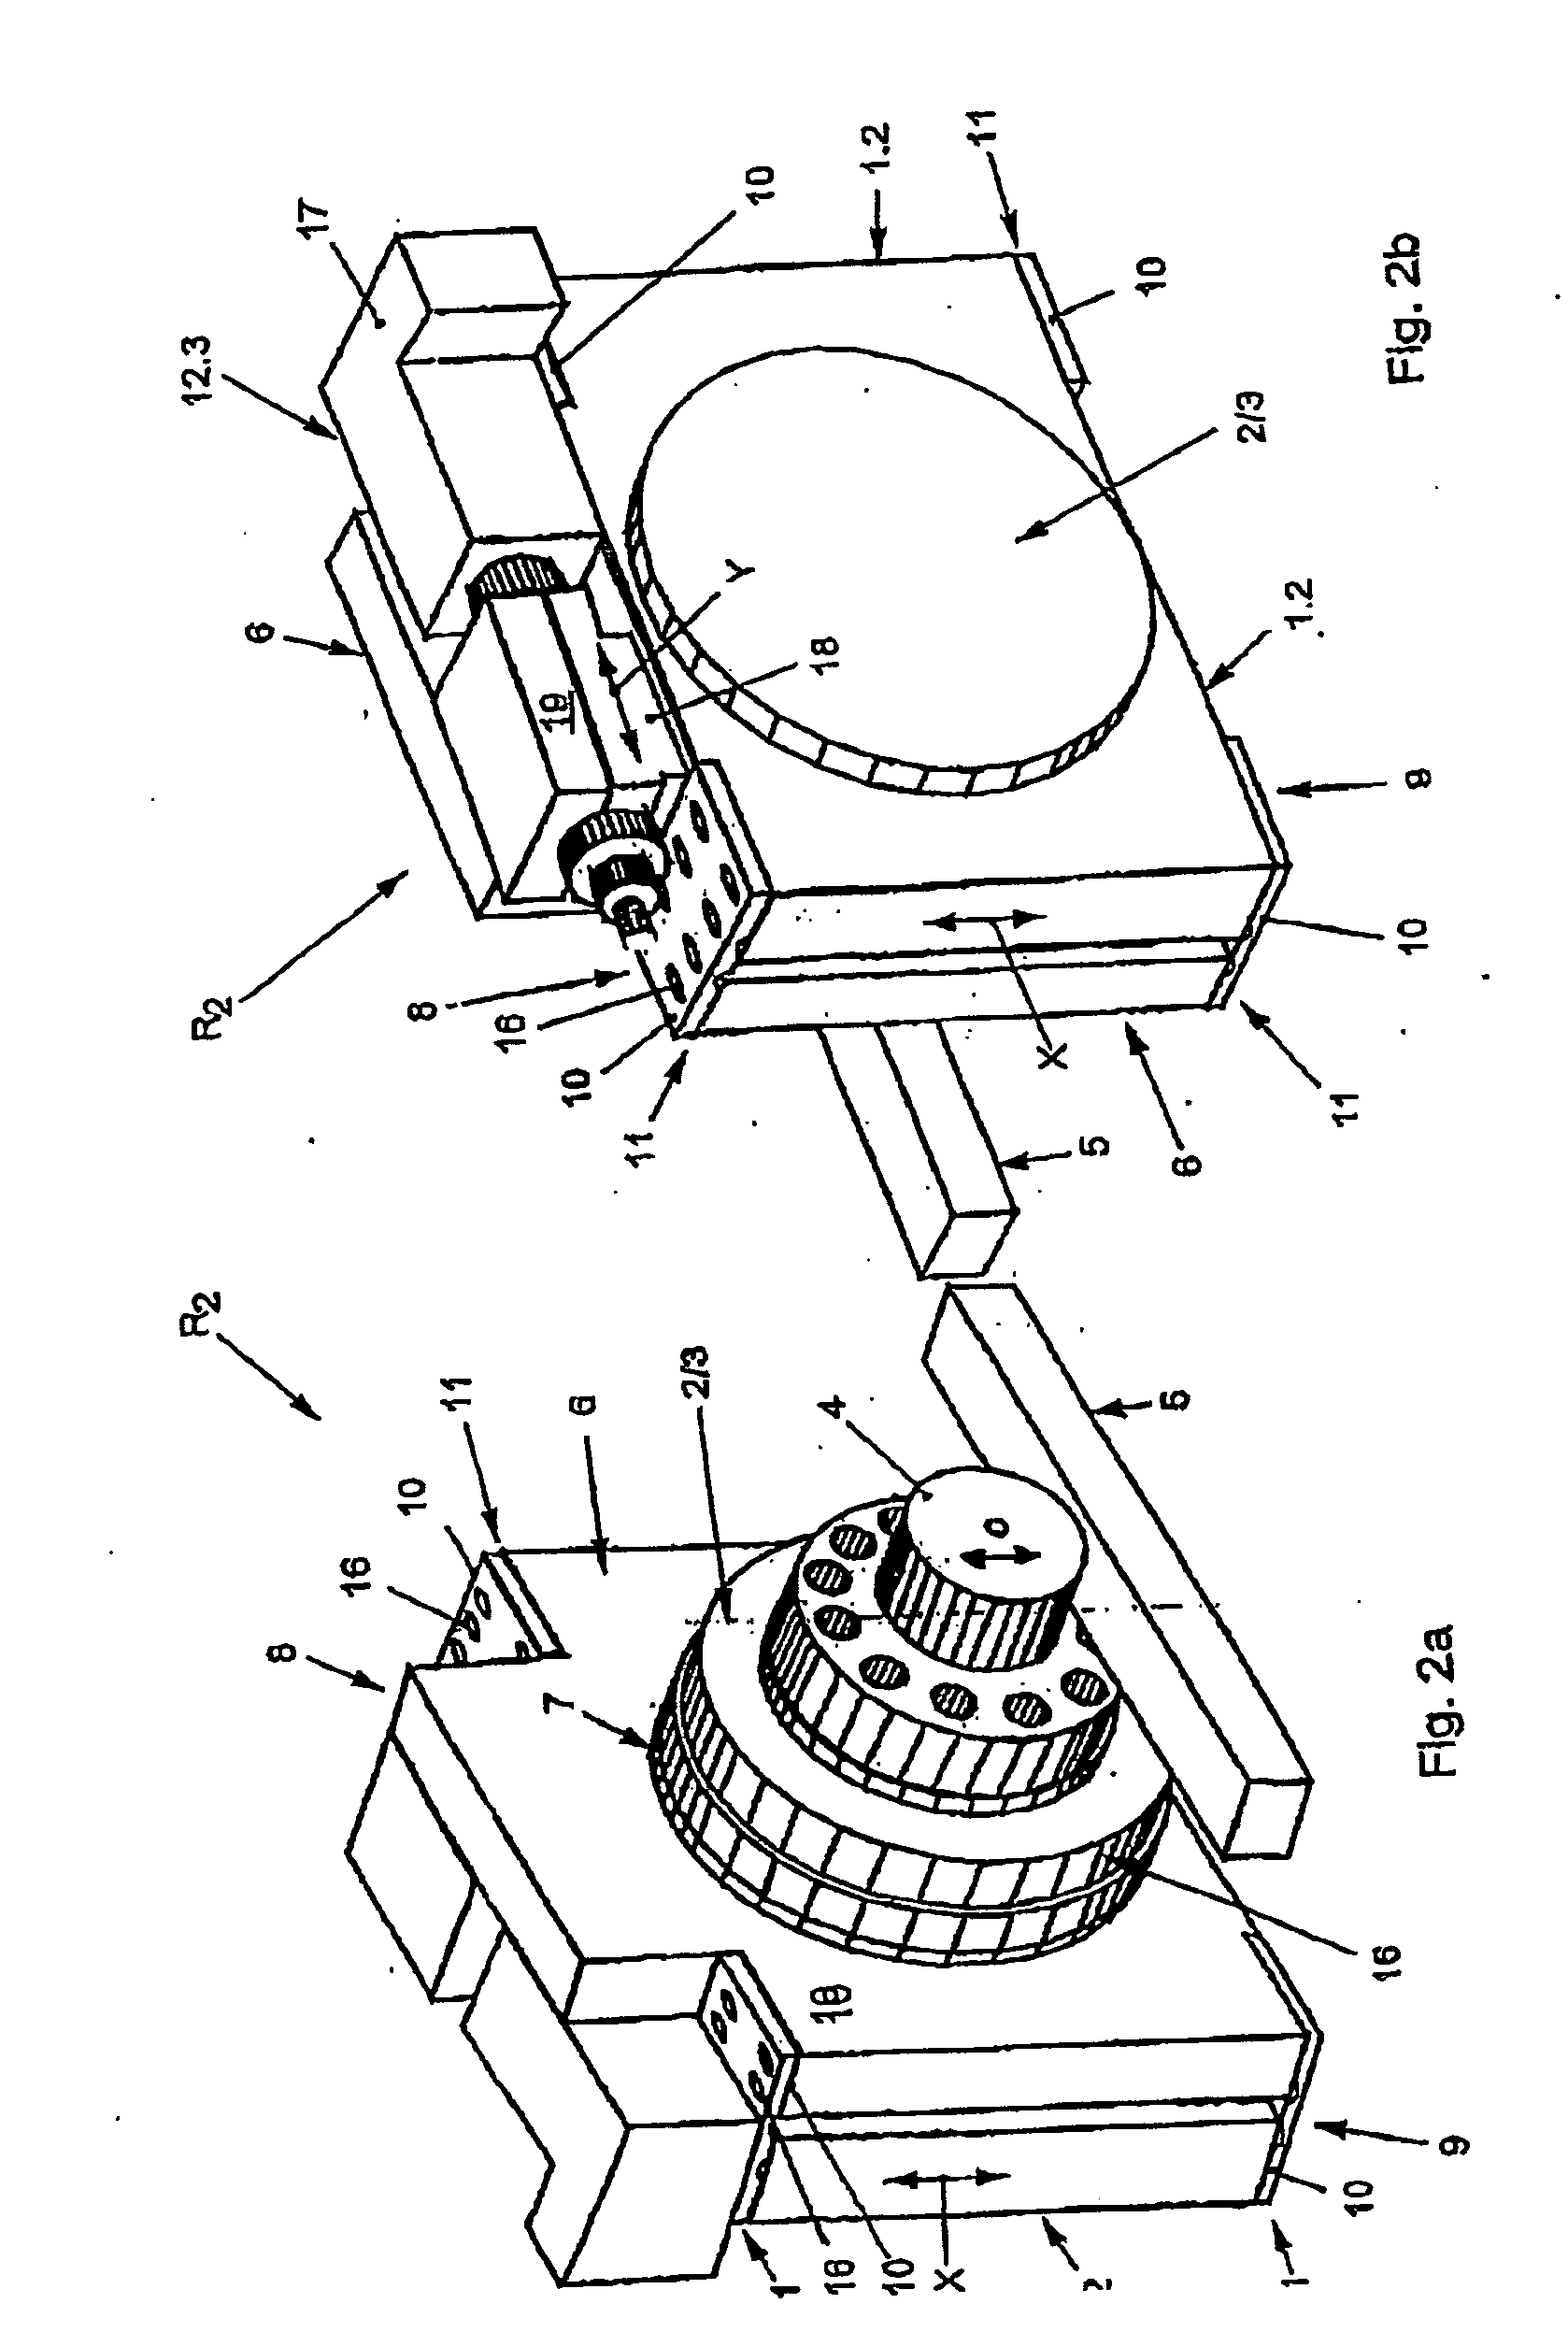 Linear drive, in particular a rack and pinion drive